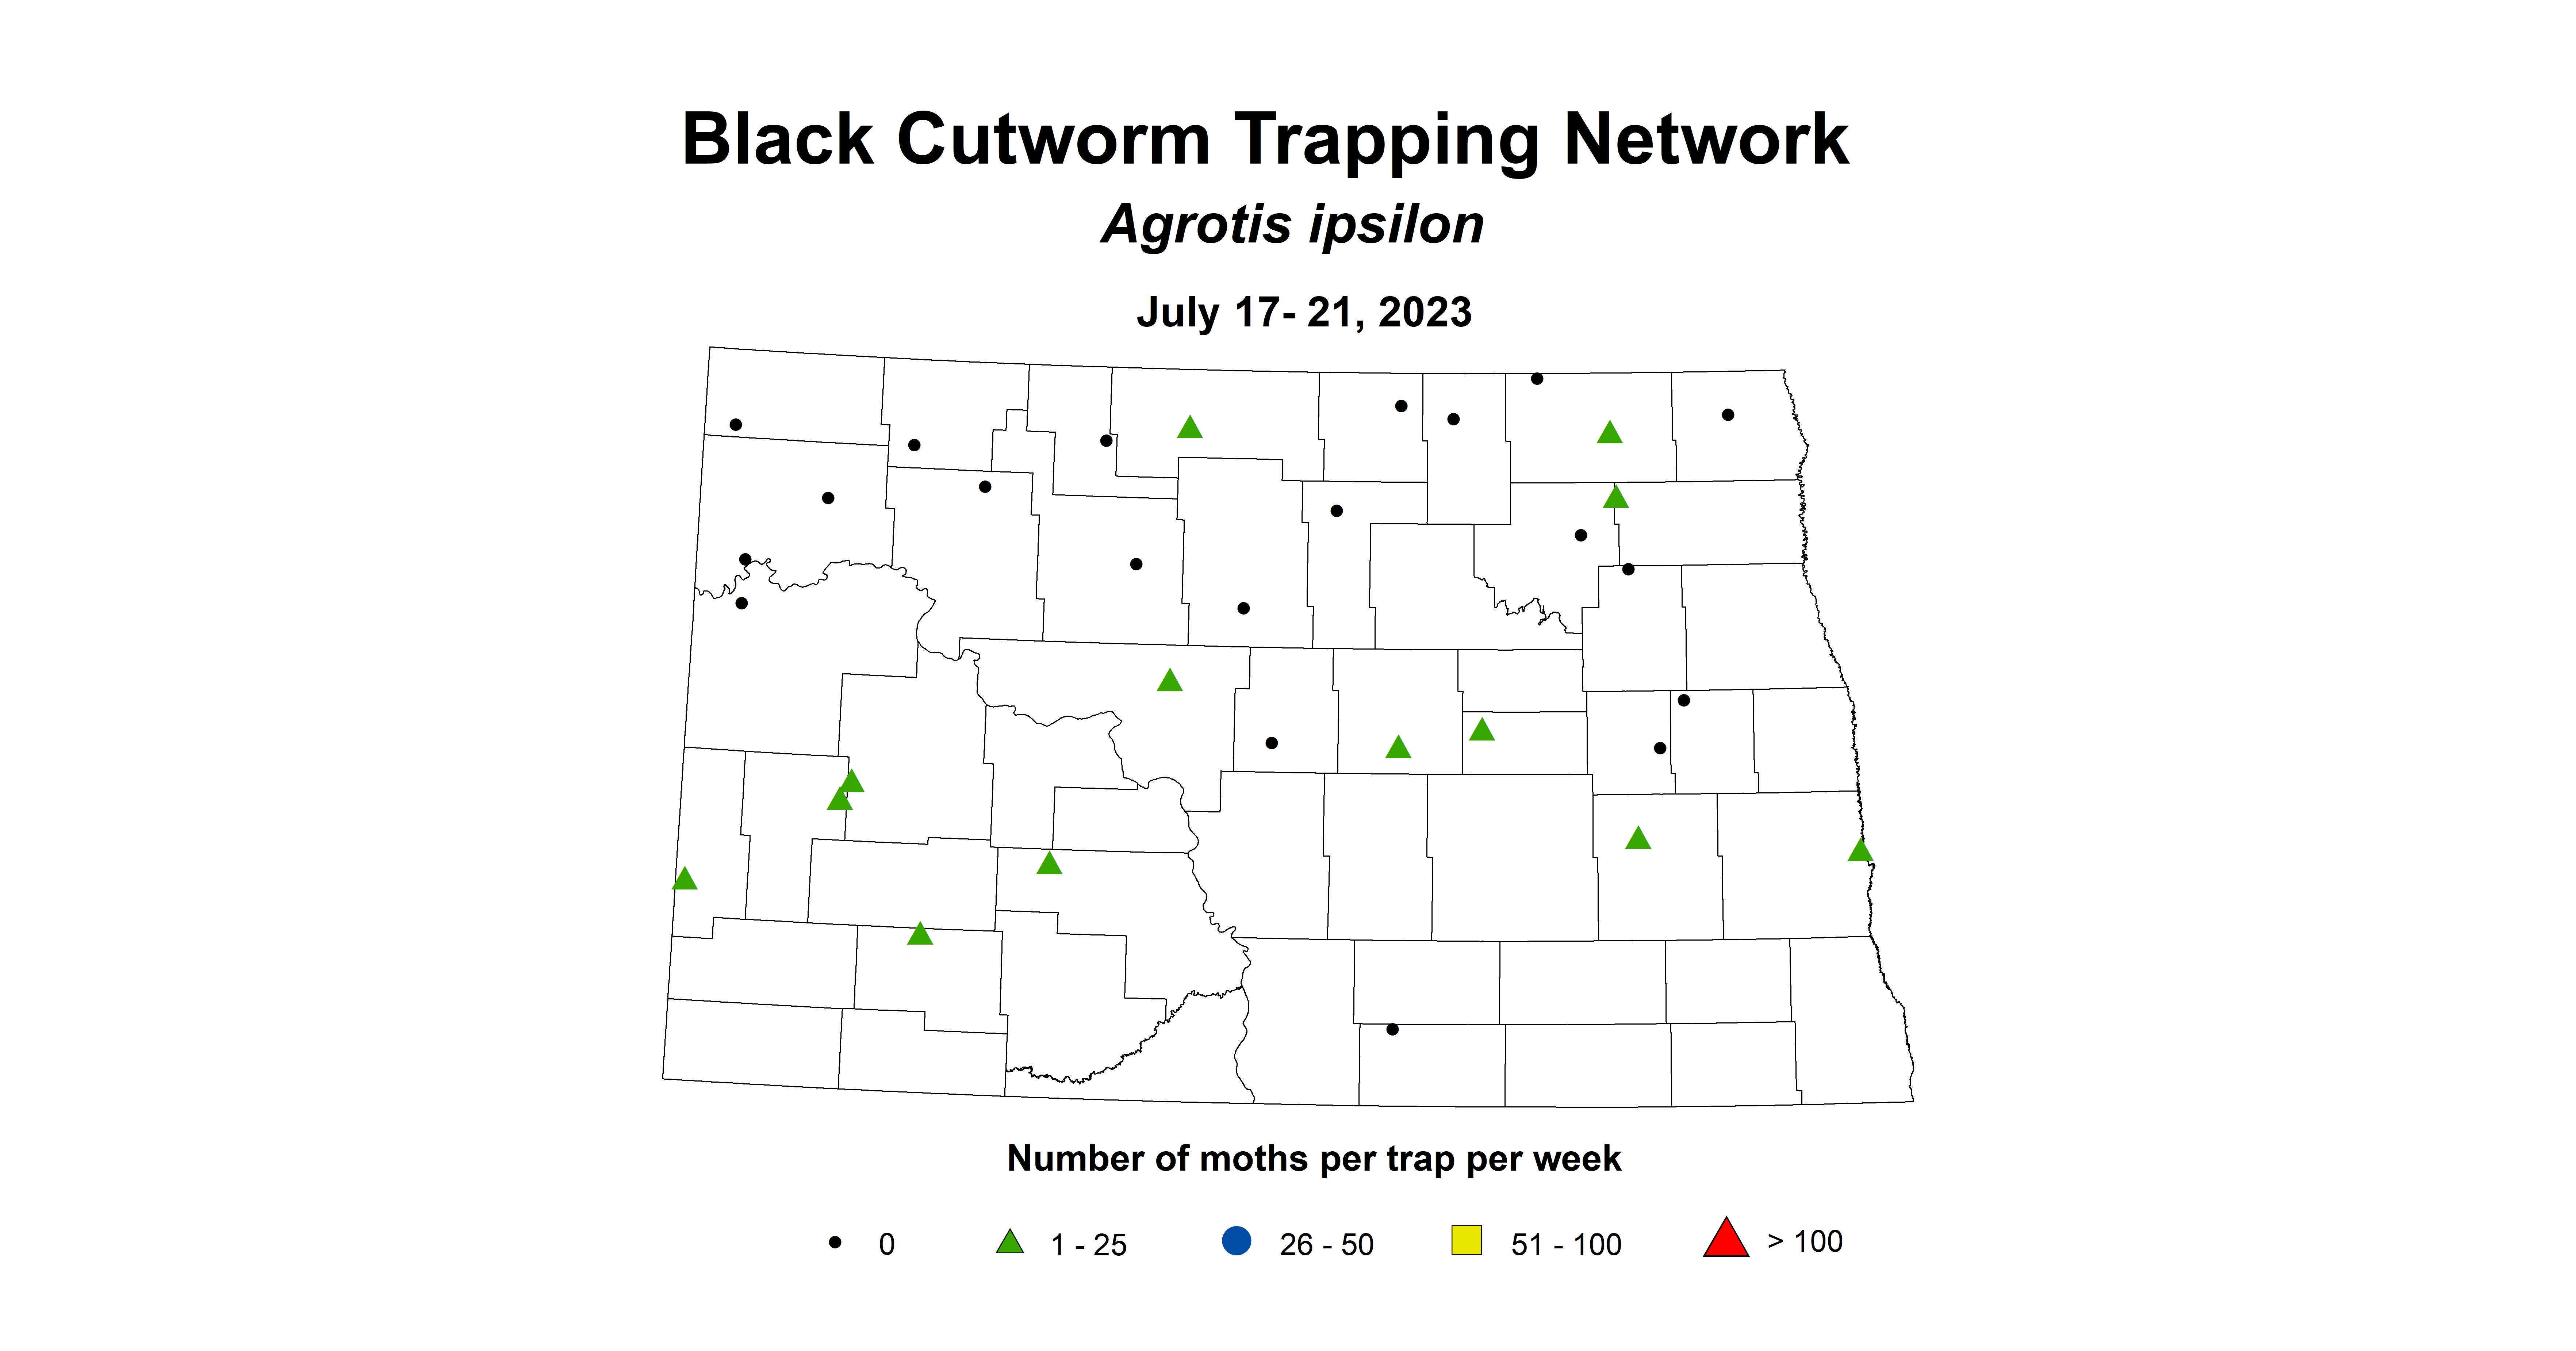 wheat black cutworm insect trap July 17-21 2023